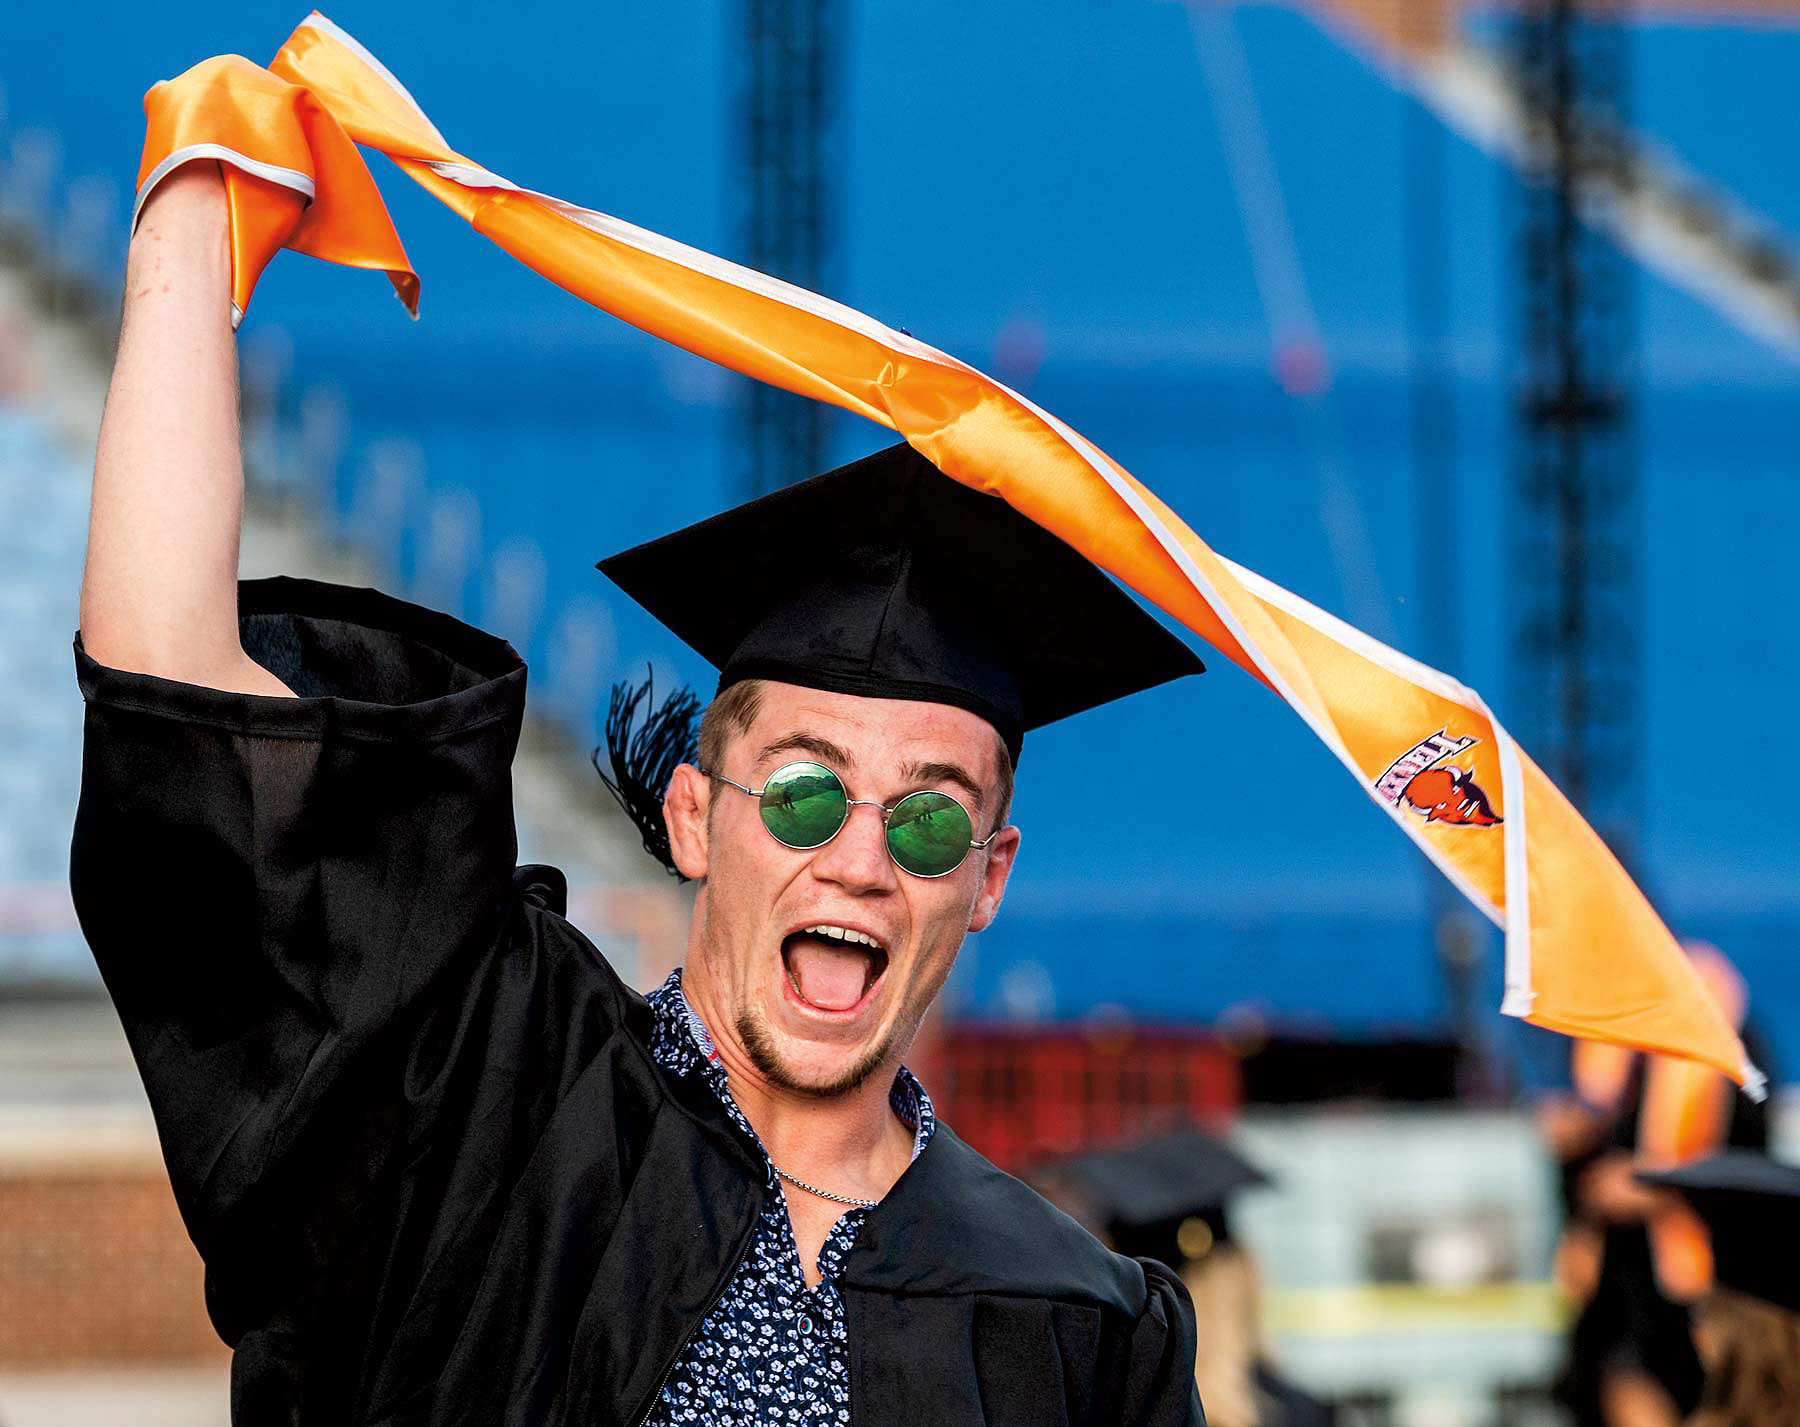 Graduate of Bucknell wearing a graduation cap and gown and green circular sunglasses celebrating happily